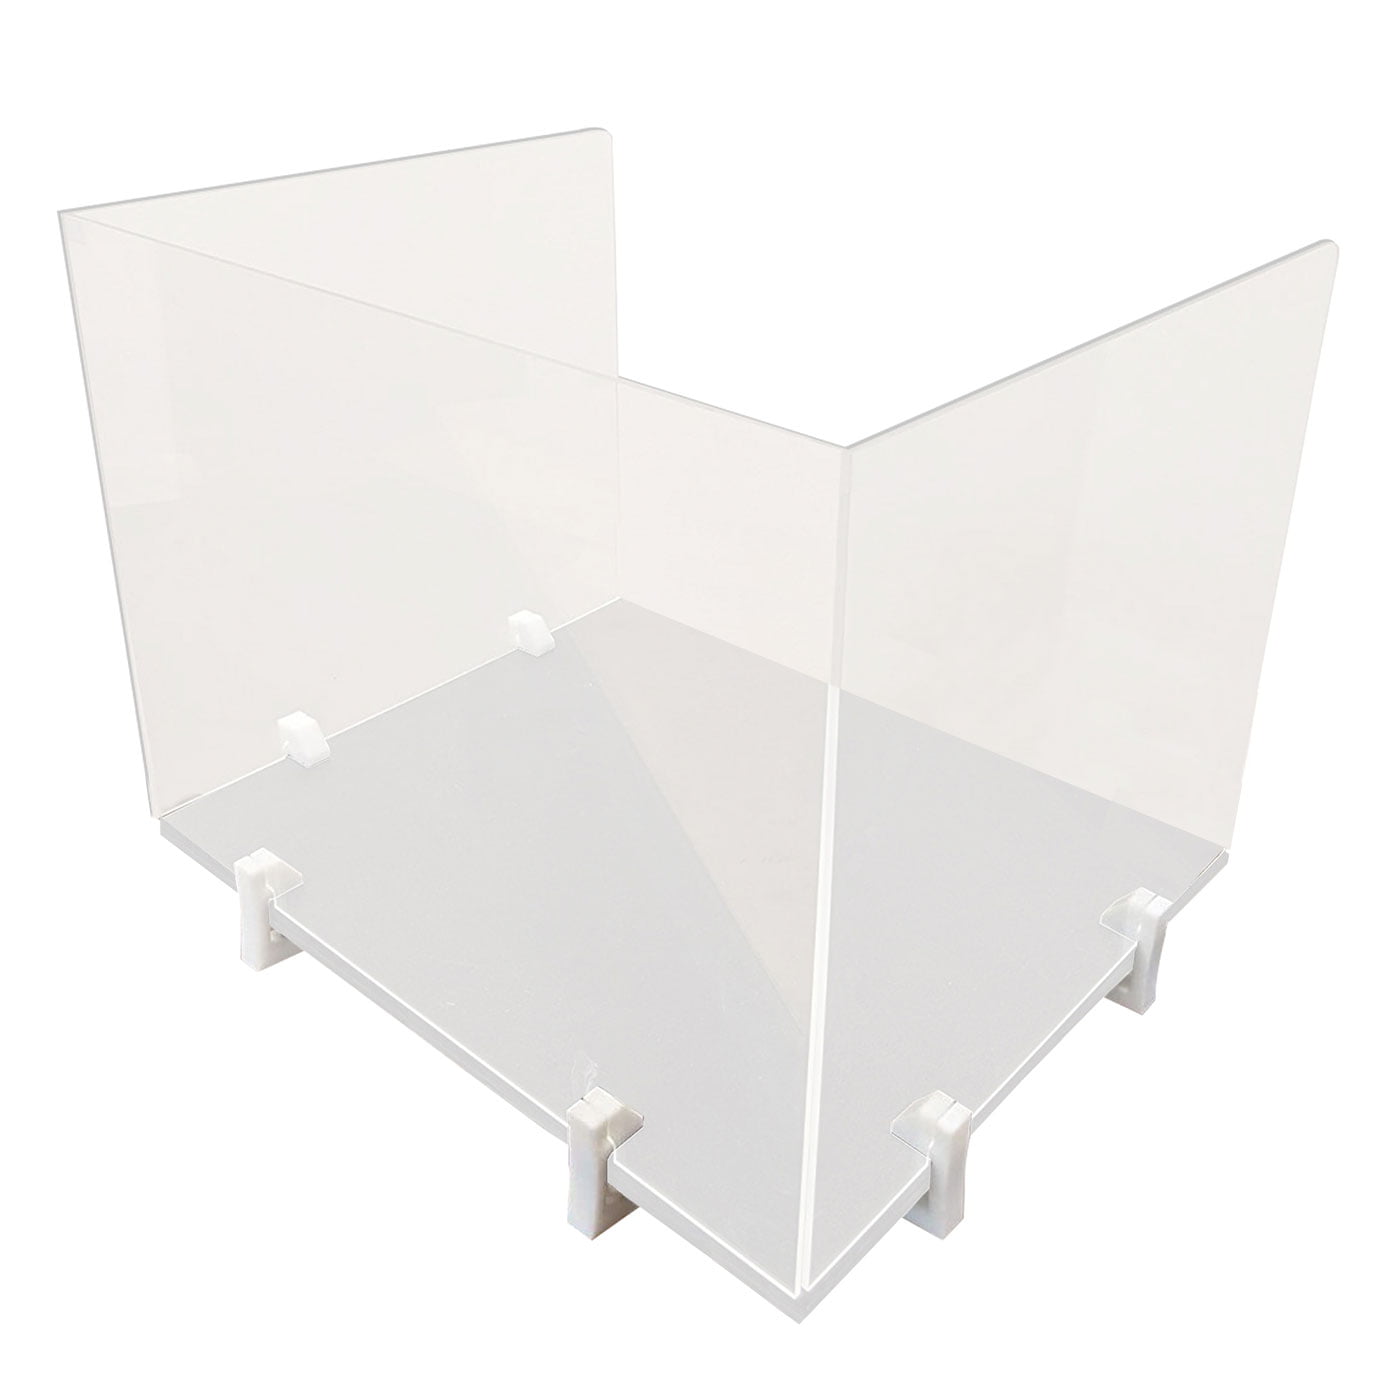 Clamp-On Schools Perfect for Offices 24 x 24 Libraries & More Clear Offex Desktop Panel Protective Acrylic Shield & Sneeze Guard Cubicle Wall Extender 